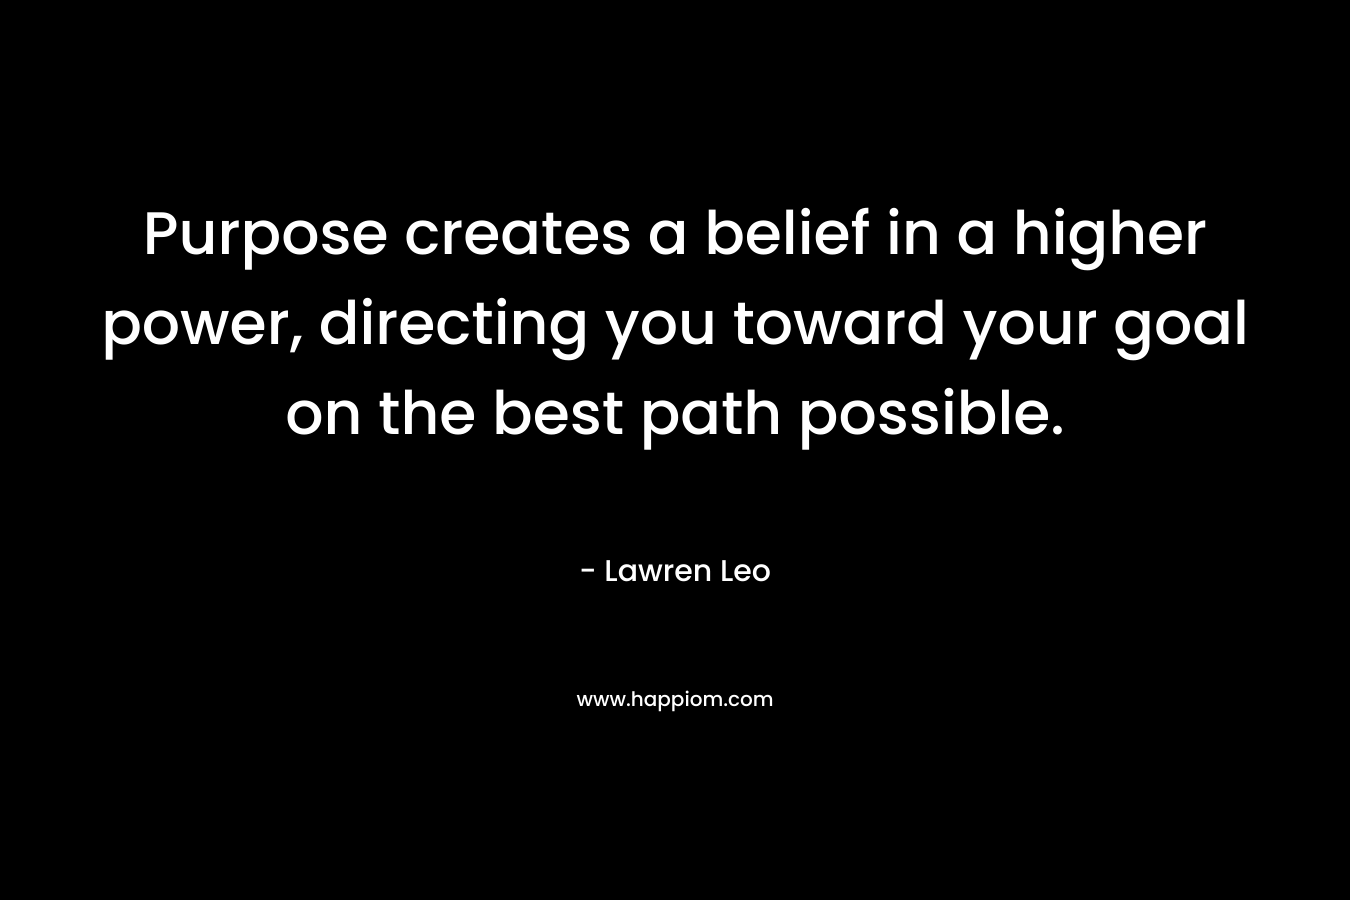 Purpose creates a belief in a higher power, directing you toward your goal on the best path possible. – Lawren Leo